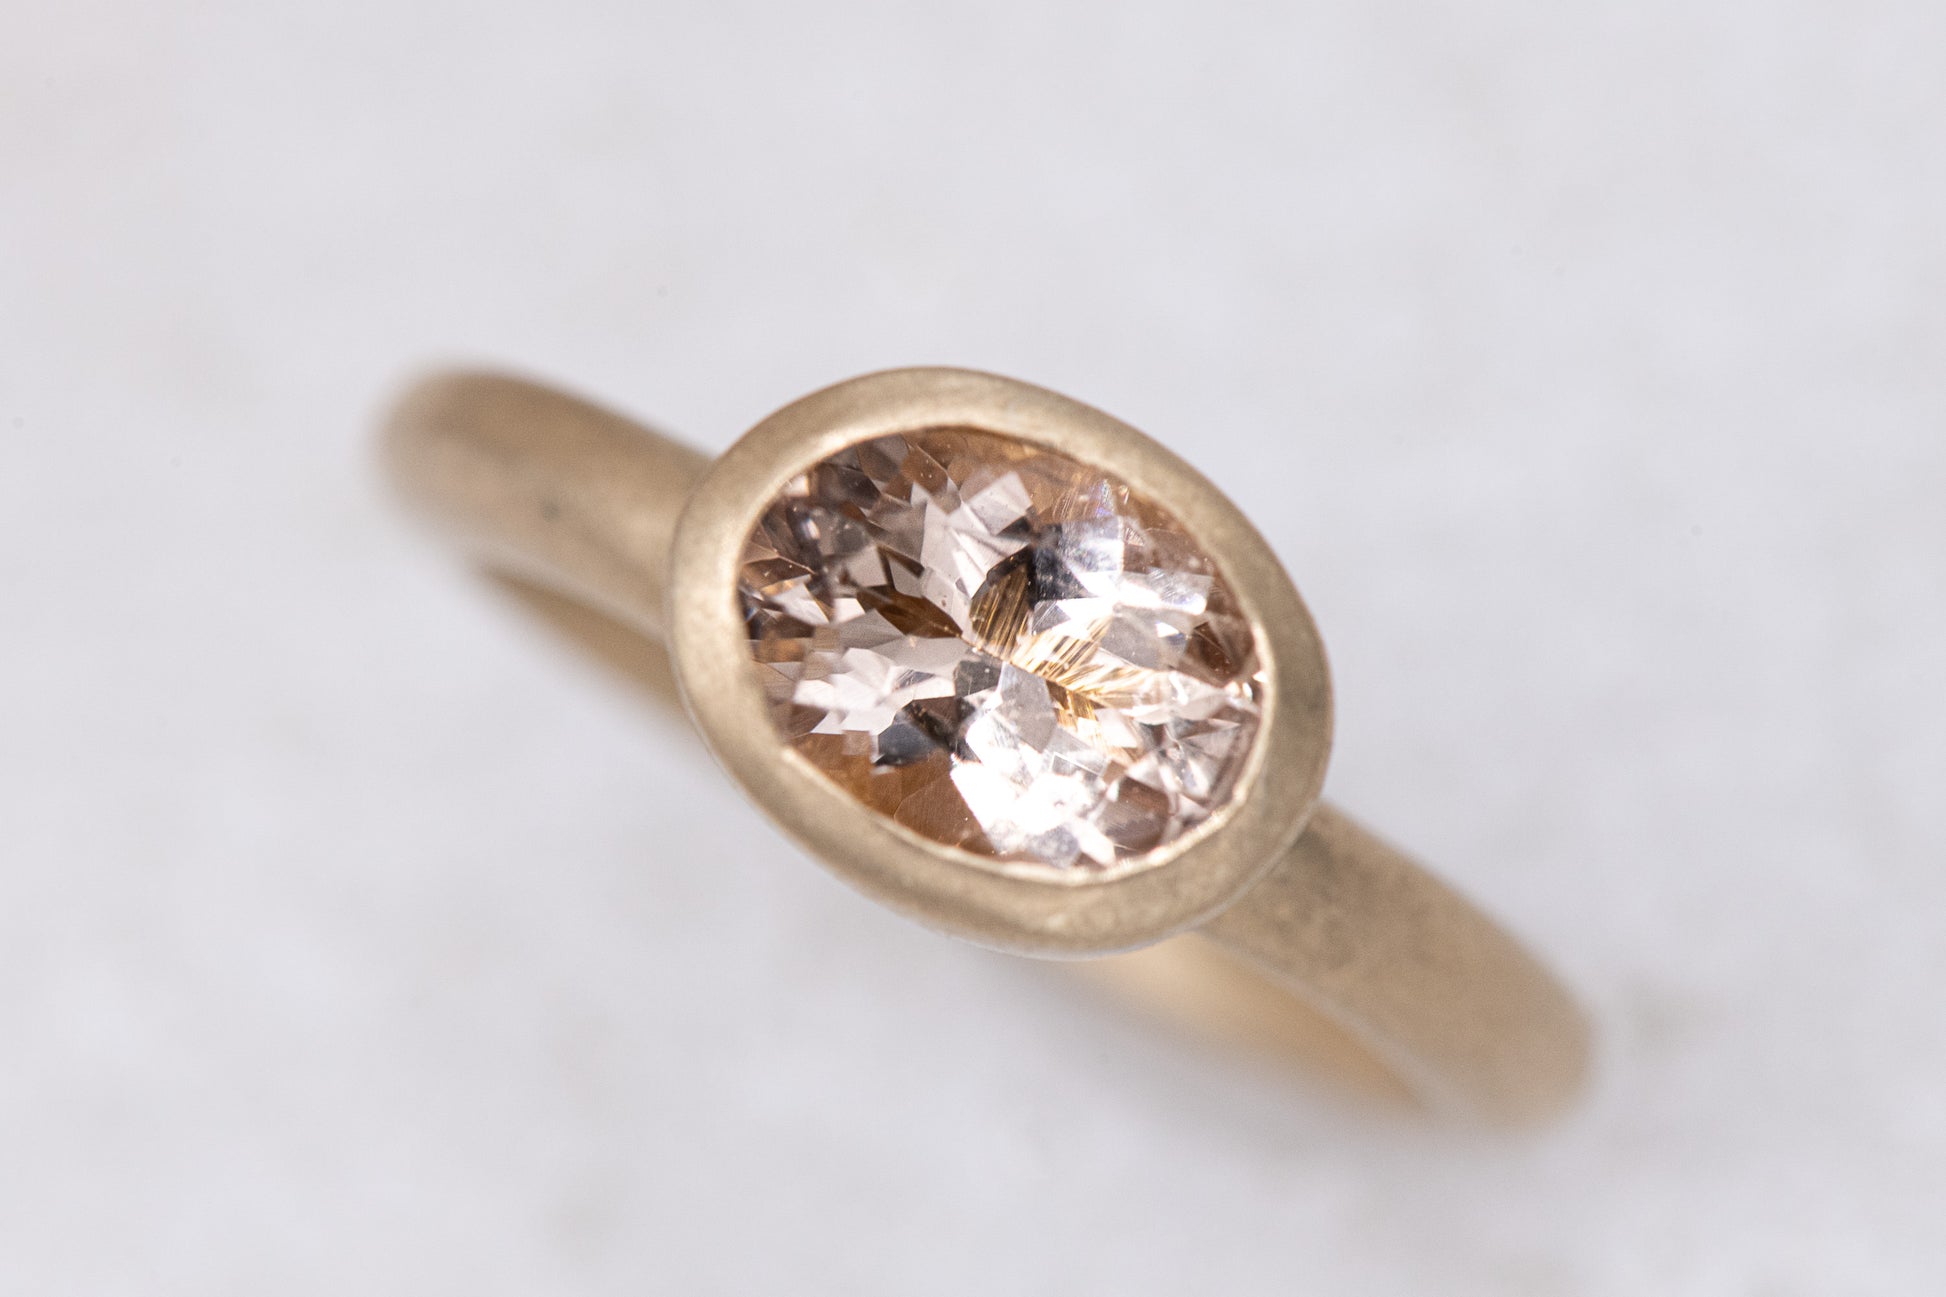 A handmade yellow gold ring with an Oval Morganite stone (Cassin Jewelry).